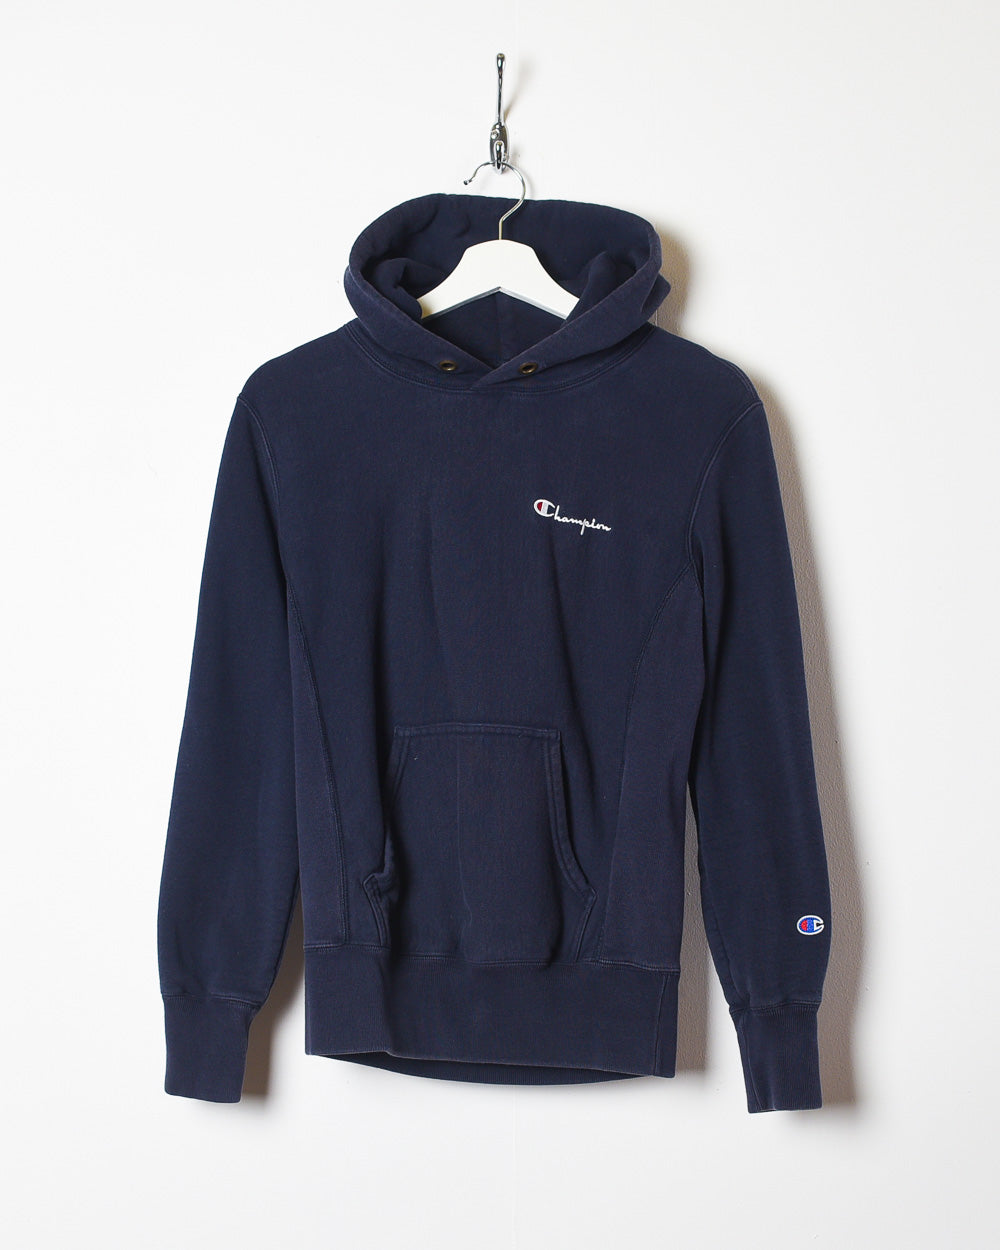 Navy Champion Reverse Weave Hoodie - X-Small